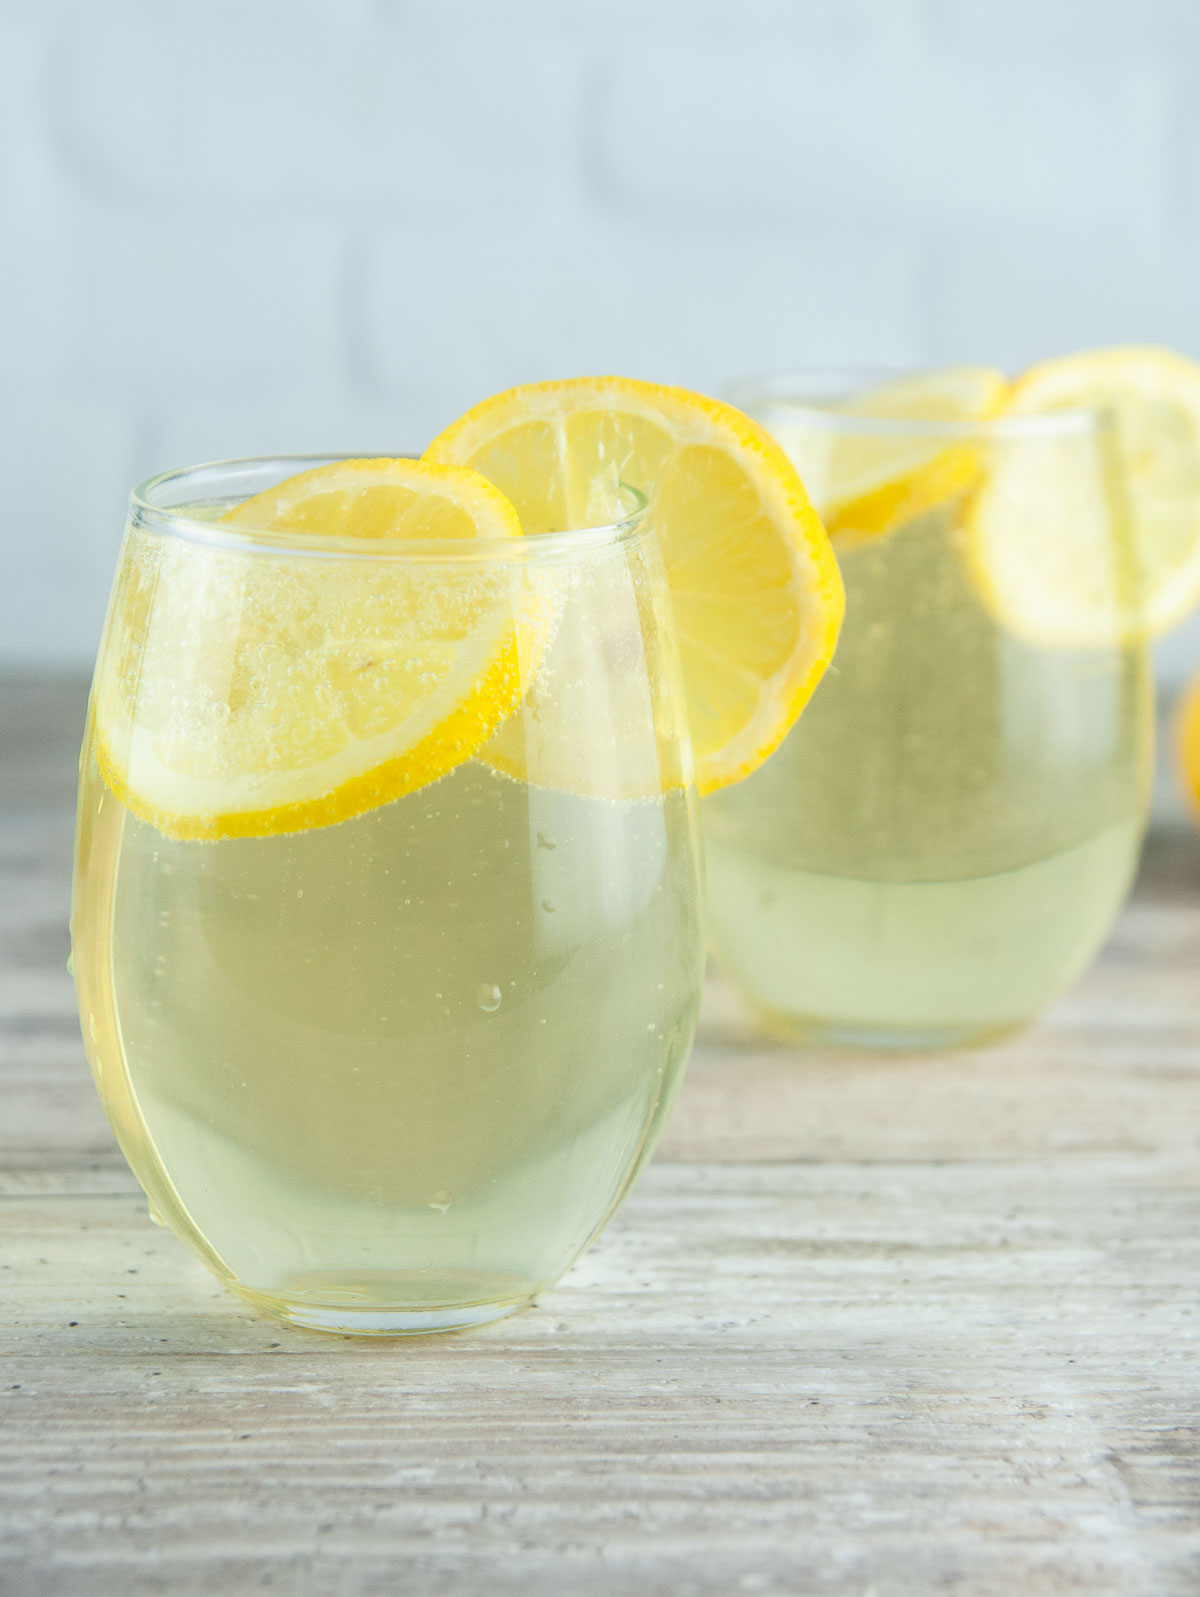 This limoncello spritz recipe will transport your tastebuds to the sundrenched Italian coasts with its bright flavor and fun bubbles. With limoncello, Prosecco, and a splash of fizzy soda, these limoncello cocktails are perfect for summer sipping or even celebrating the holidays!